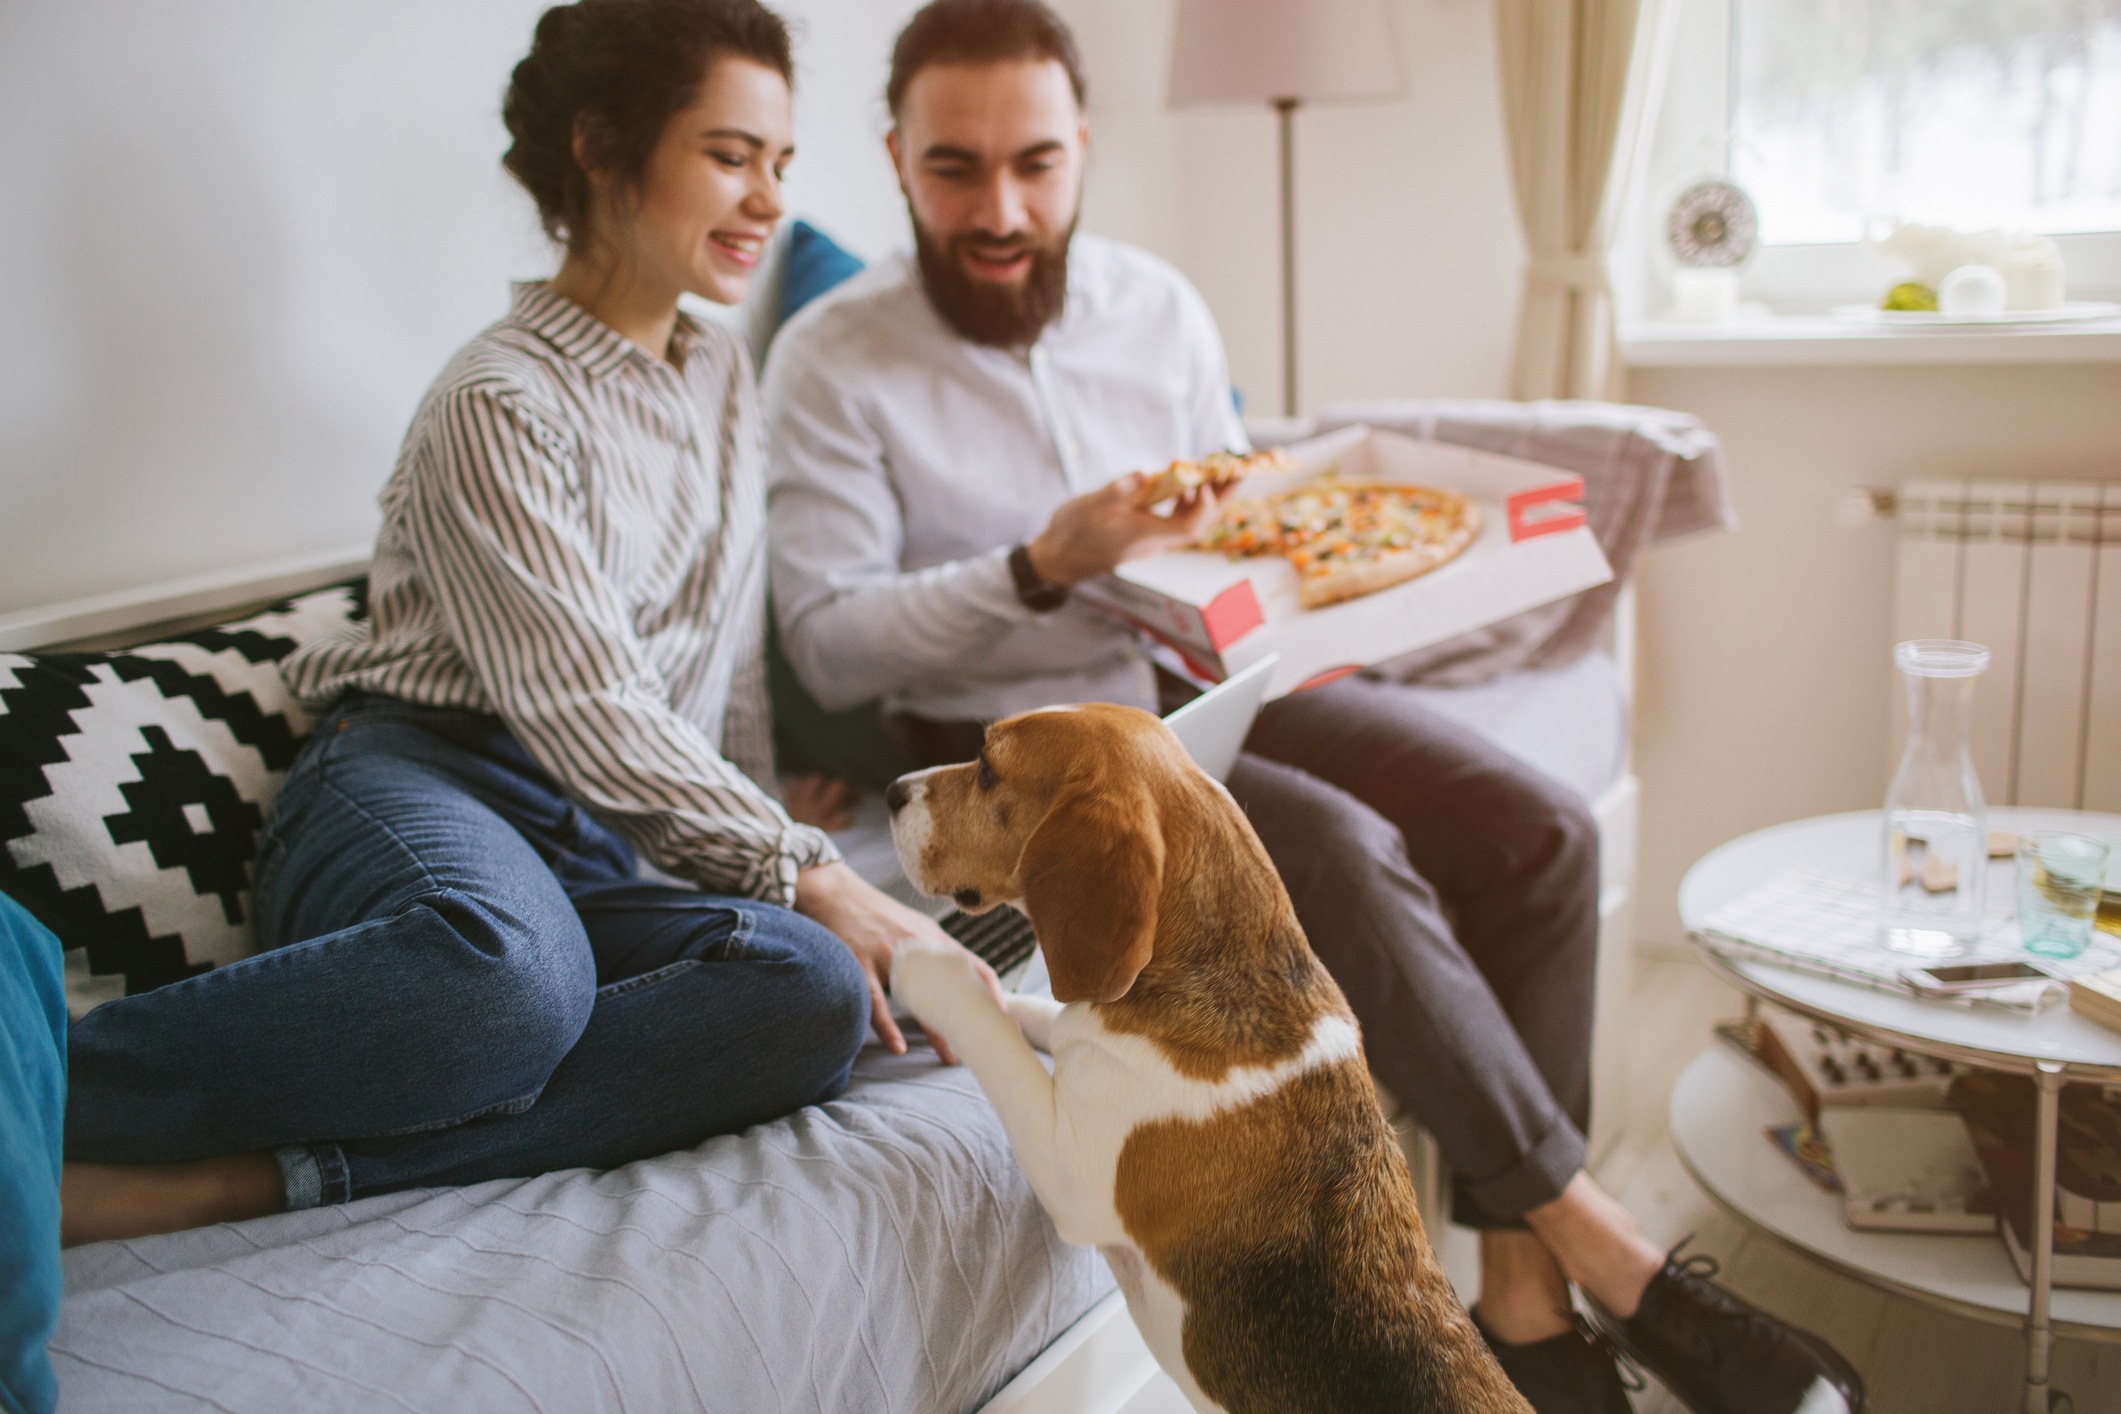 Couple with dog and pizza